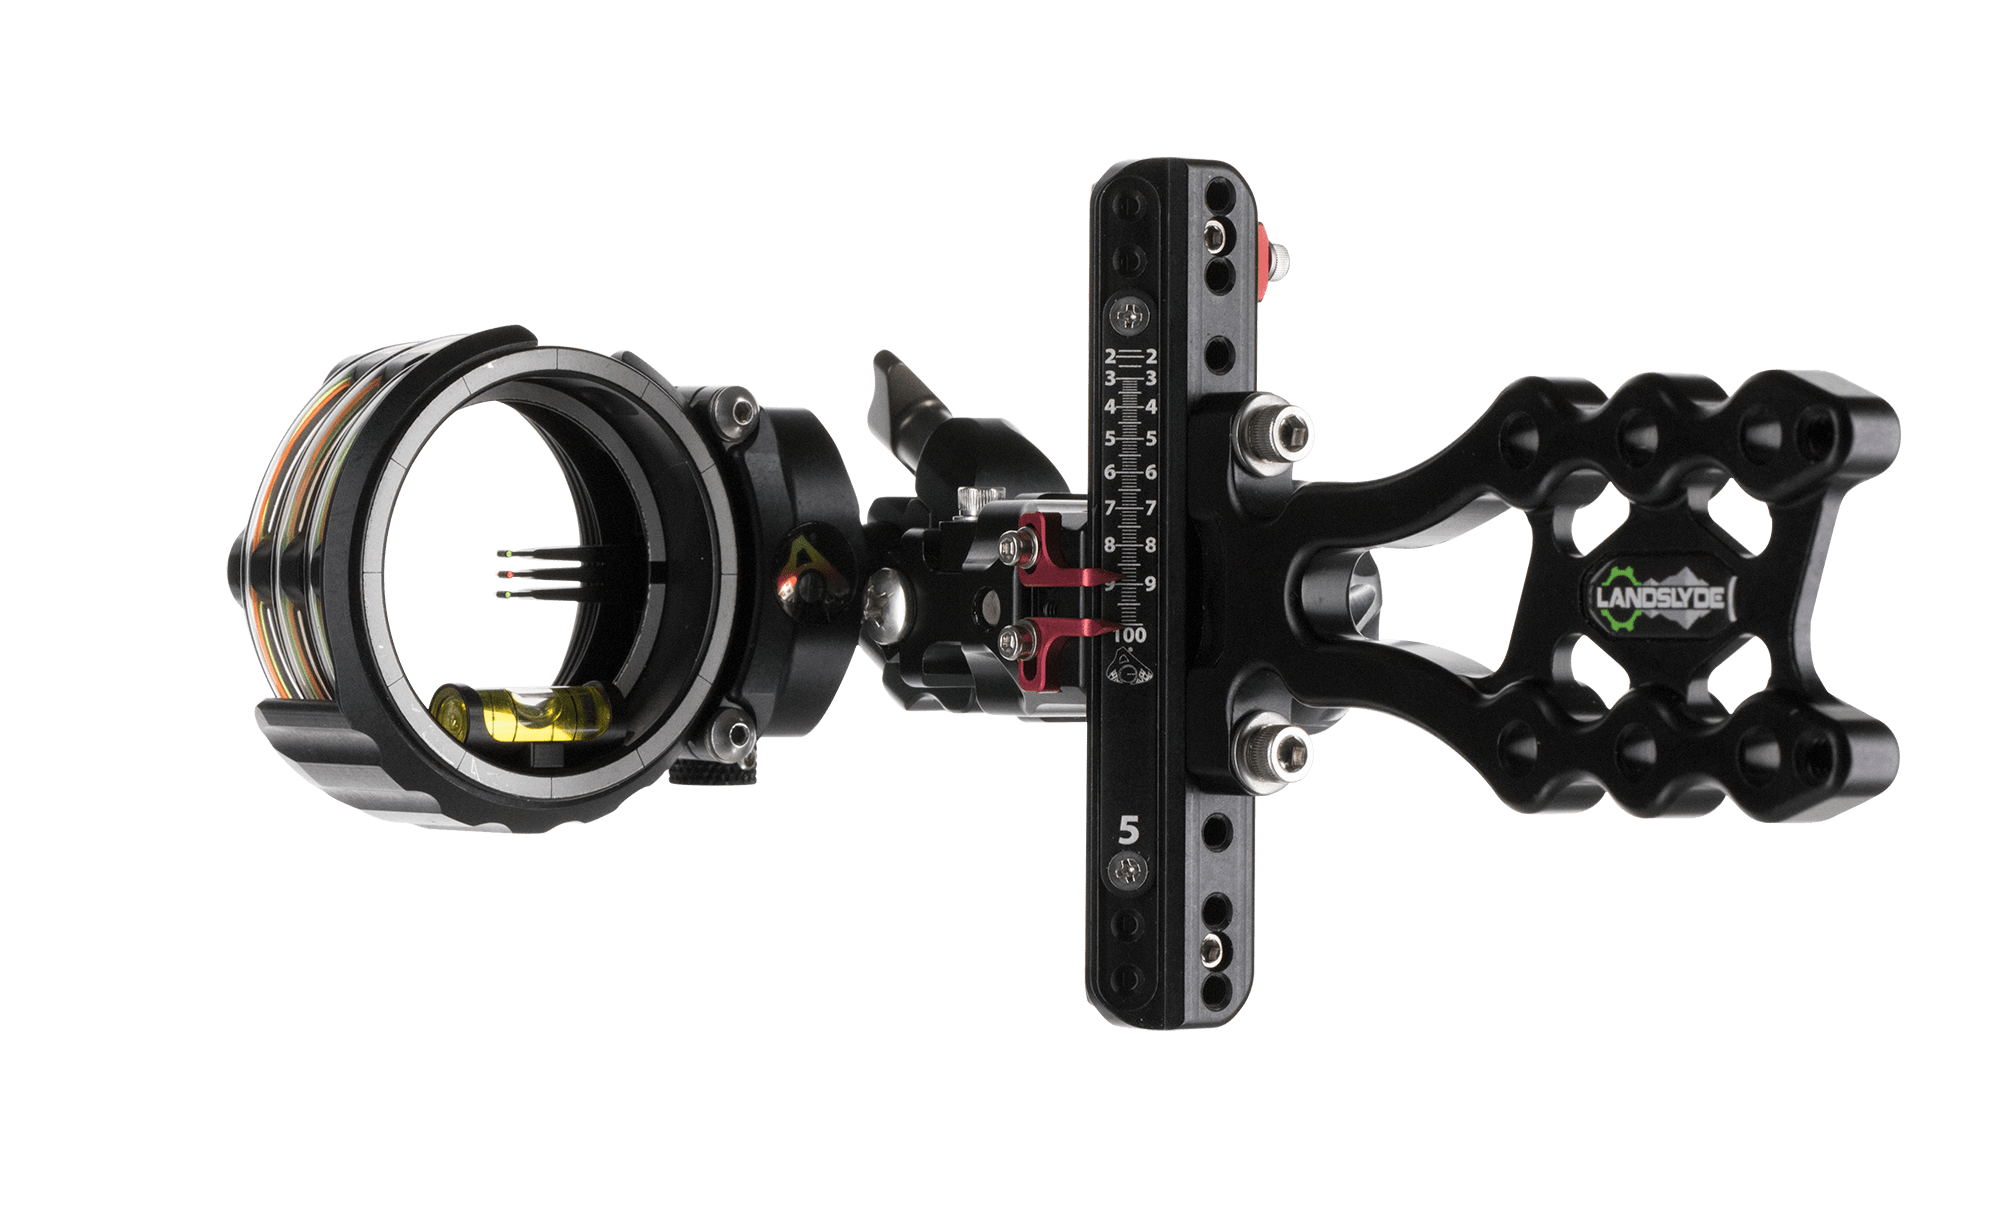 The Axcel Landsylde bow sight